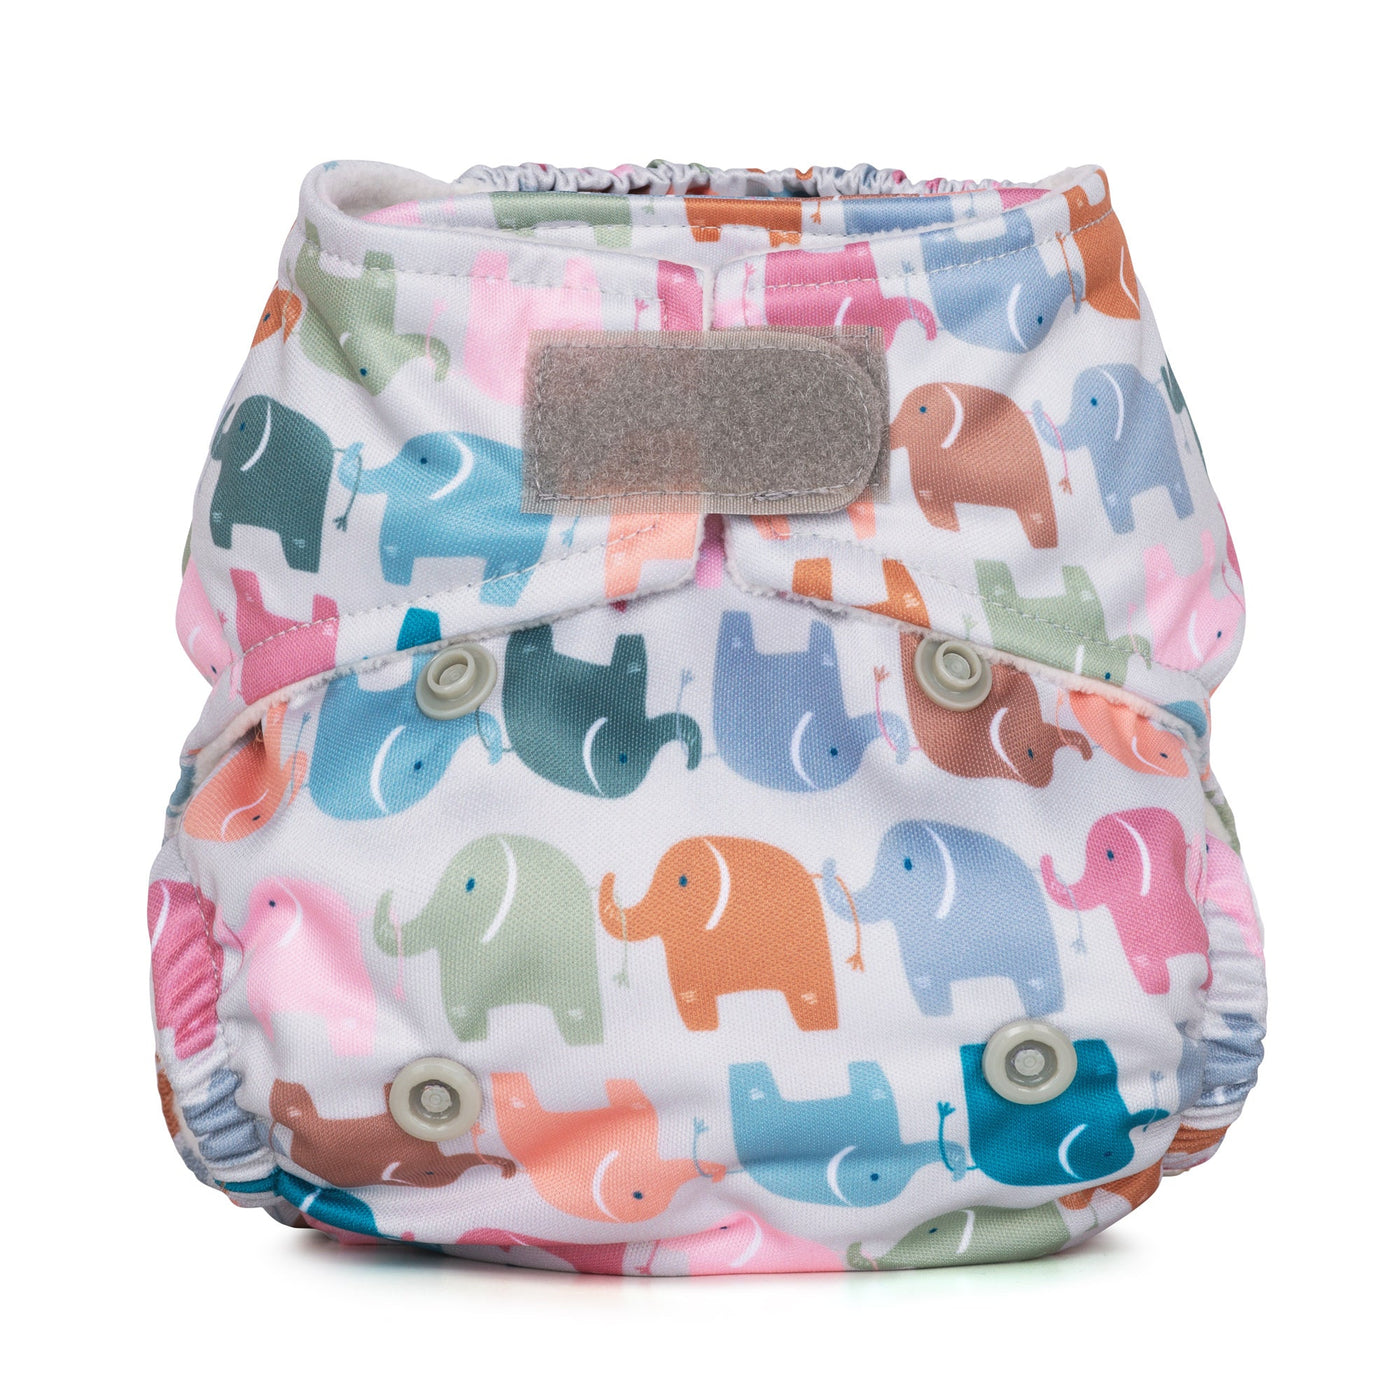 Baba + BooNewborn Reusable Nappy - PrintsColour: You and mereusable nappies all in one nappiesEarthlets